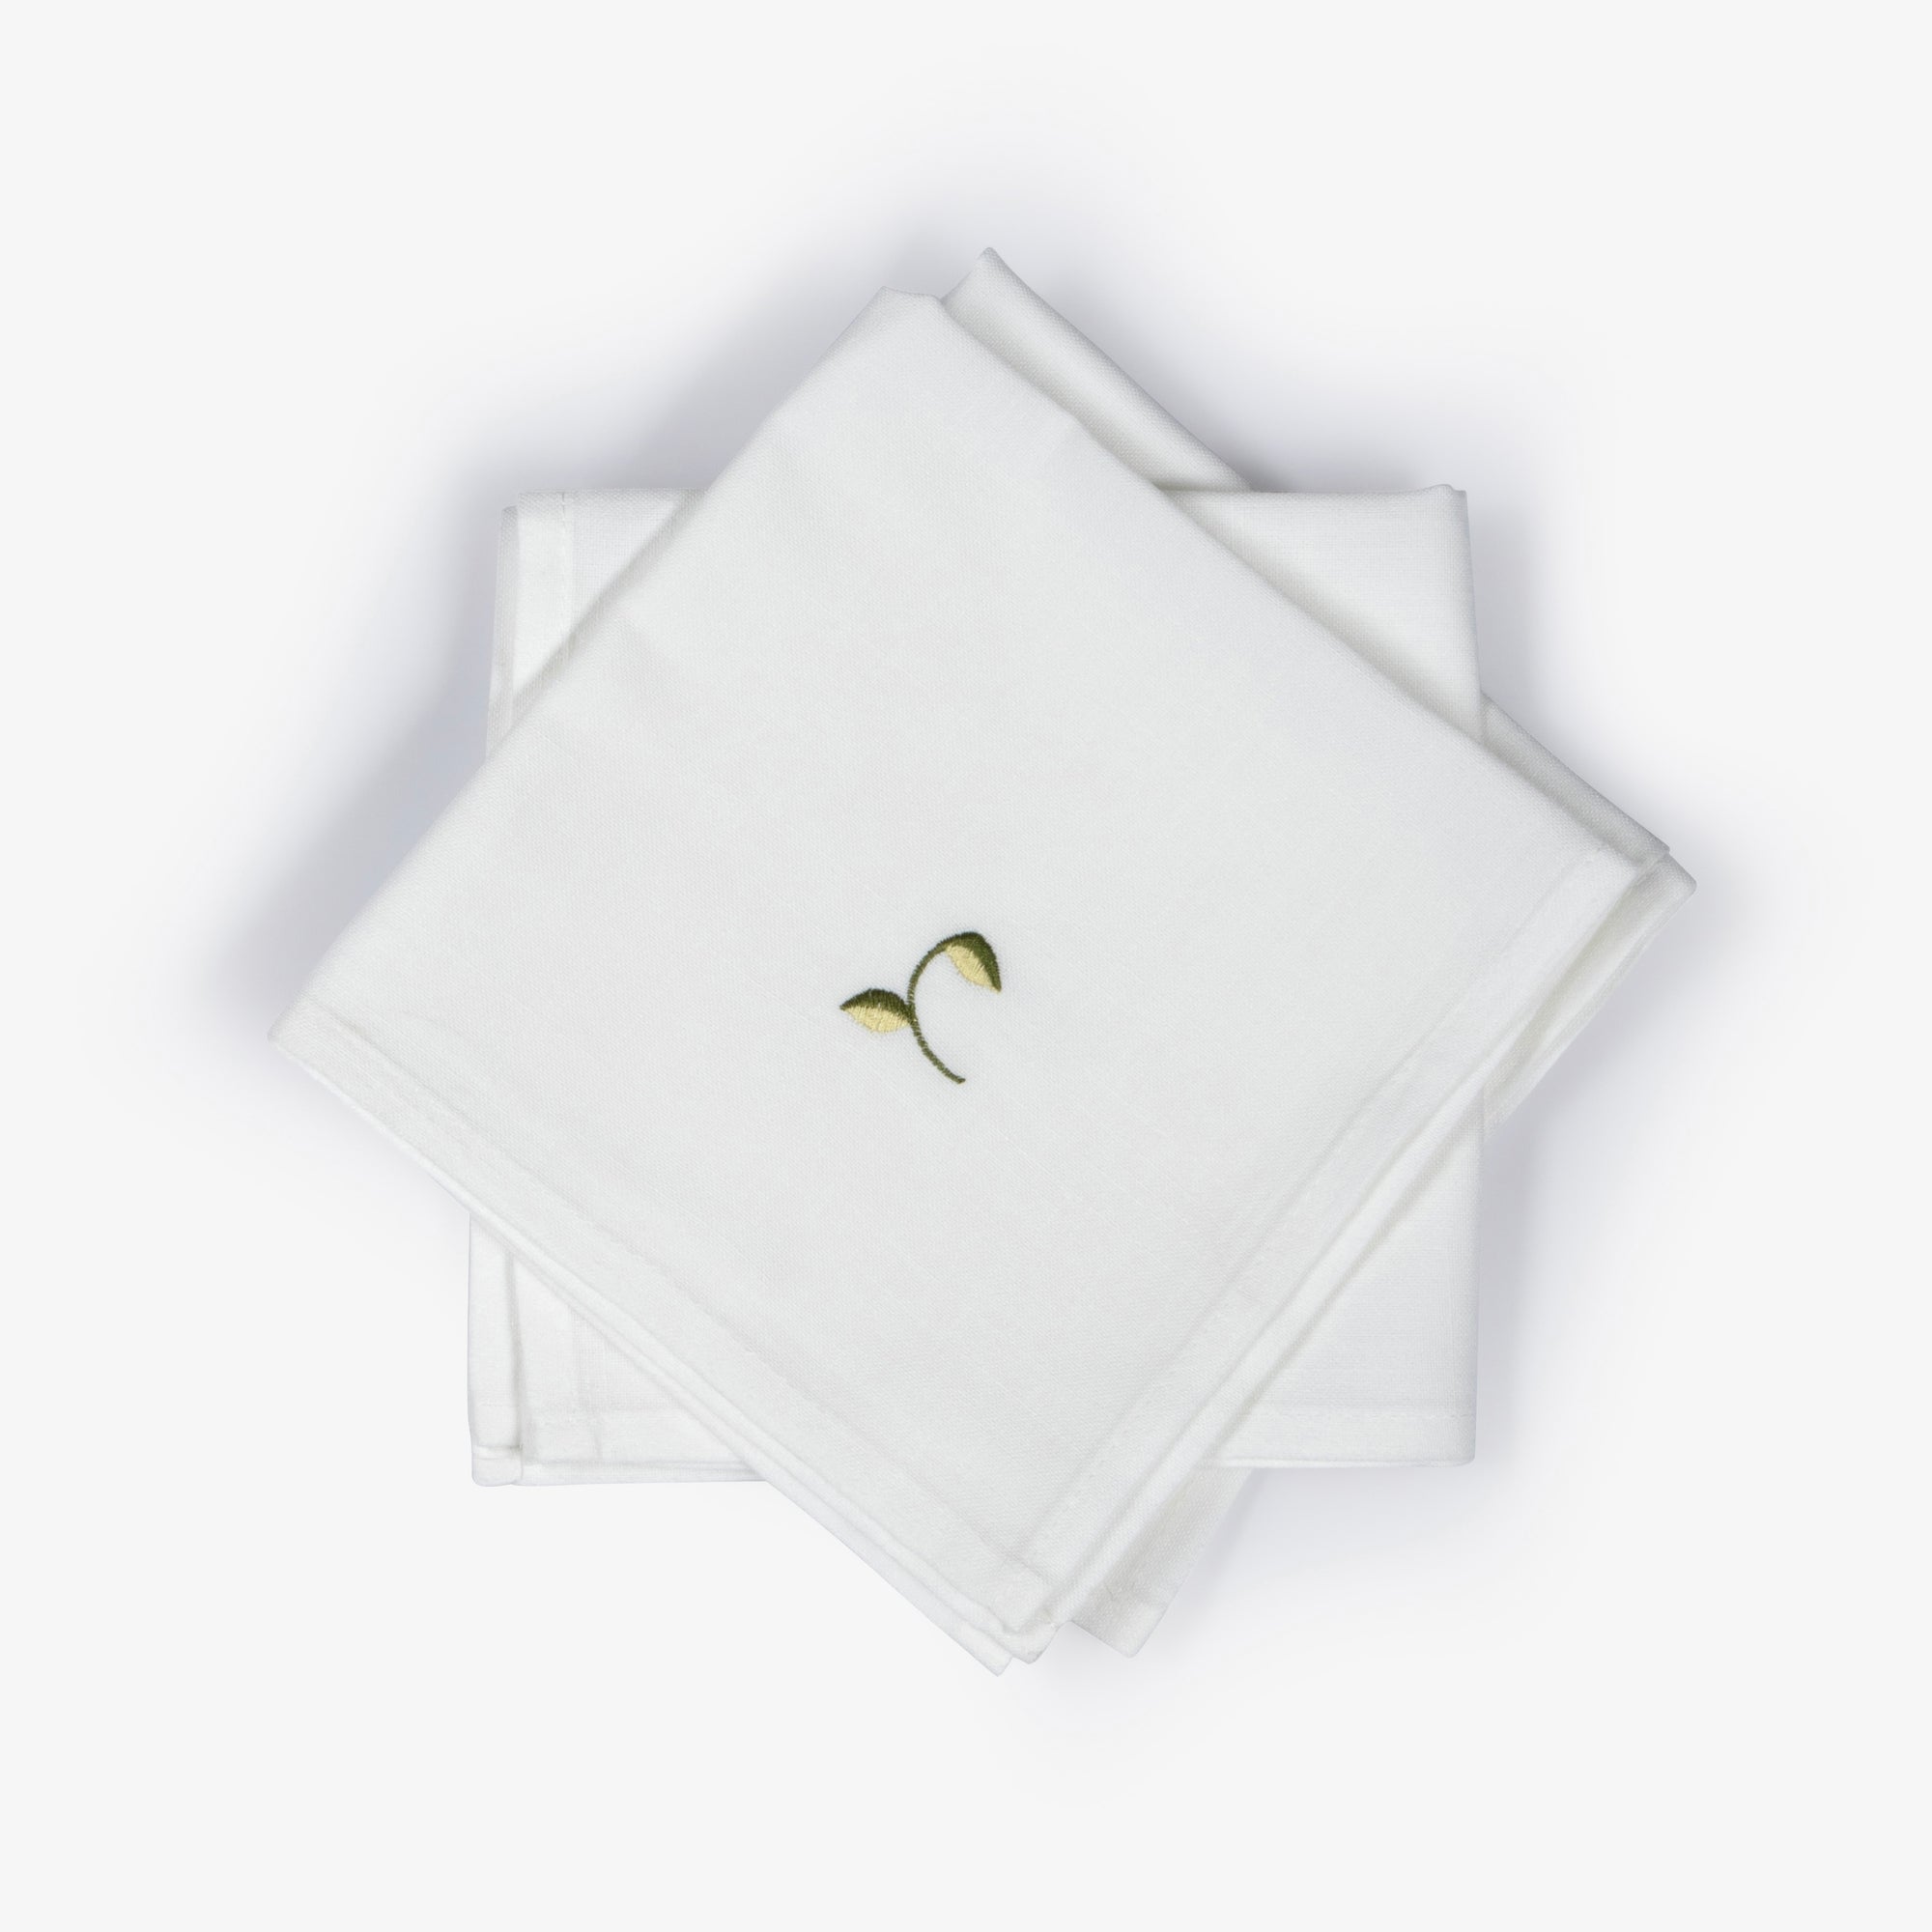 Leaf Cotton and Linen Blend Napkins, Set of Four - The Finishing Store South Africa